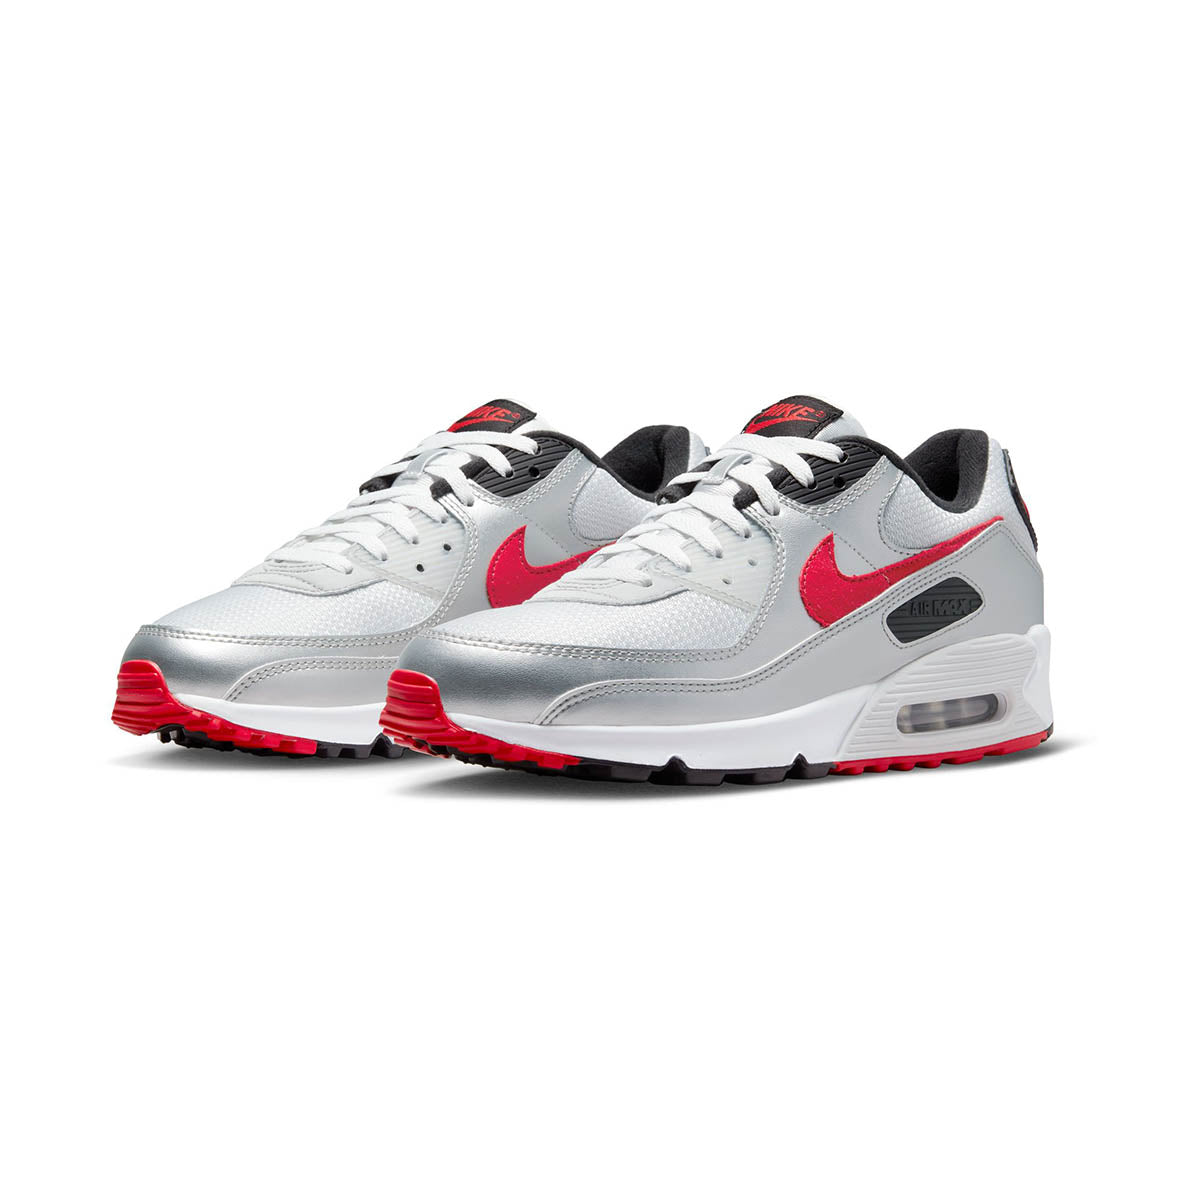 Air Max products